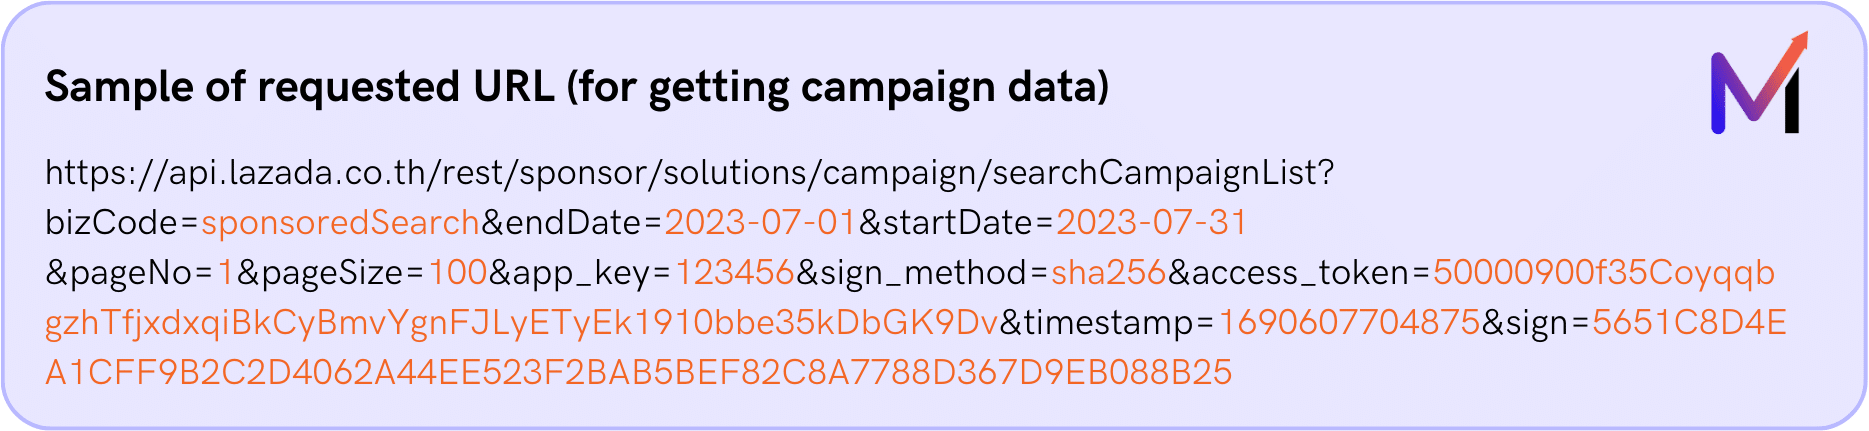 Sample of requested ULR to get your Lazada's campaign data.